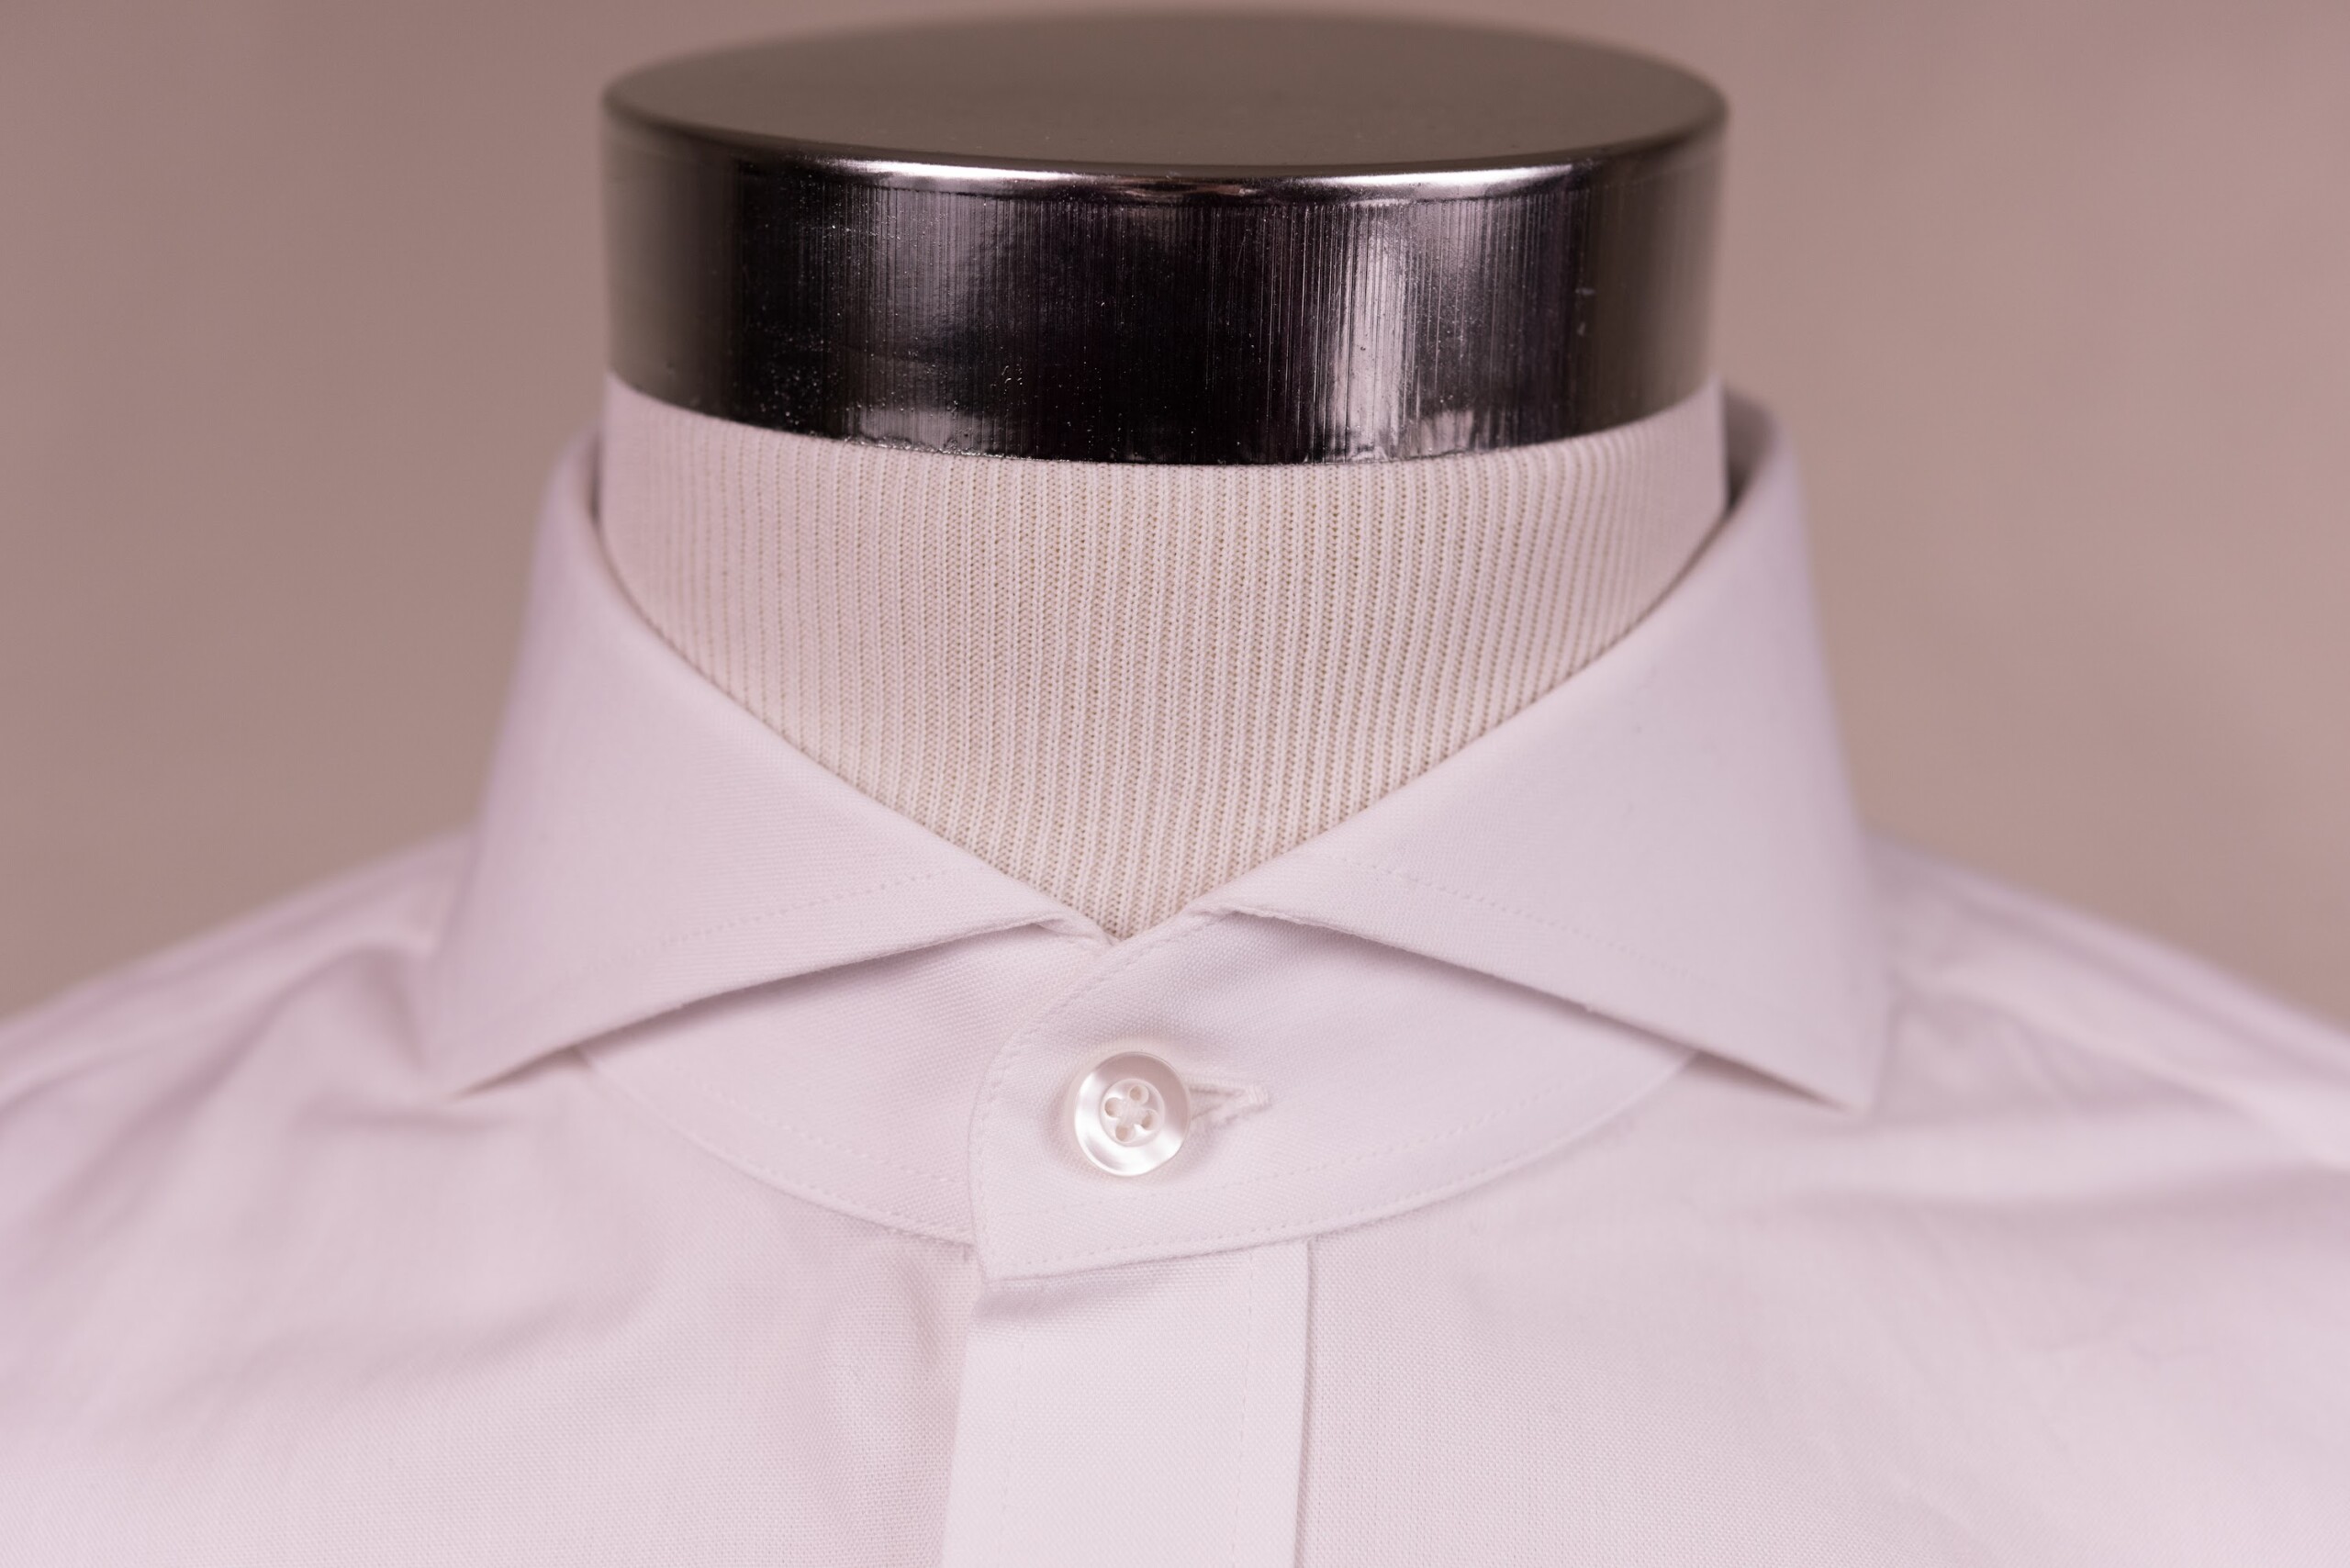 An extreme cutaway collar may work for the Half Windsor Knot